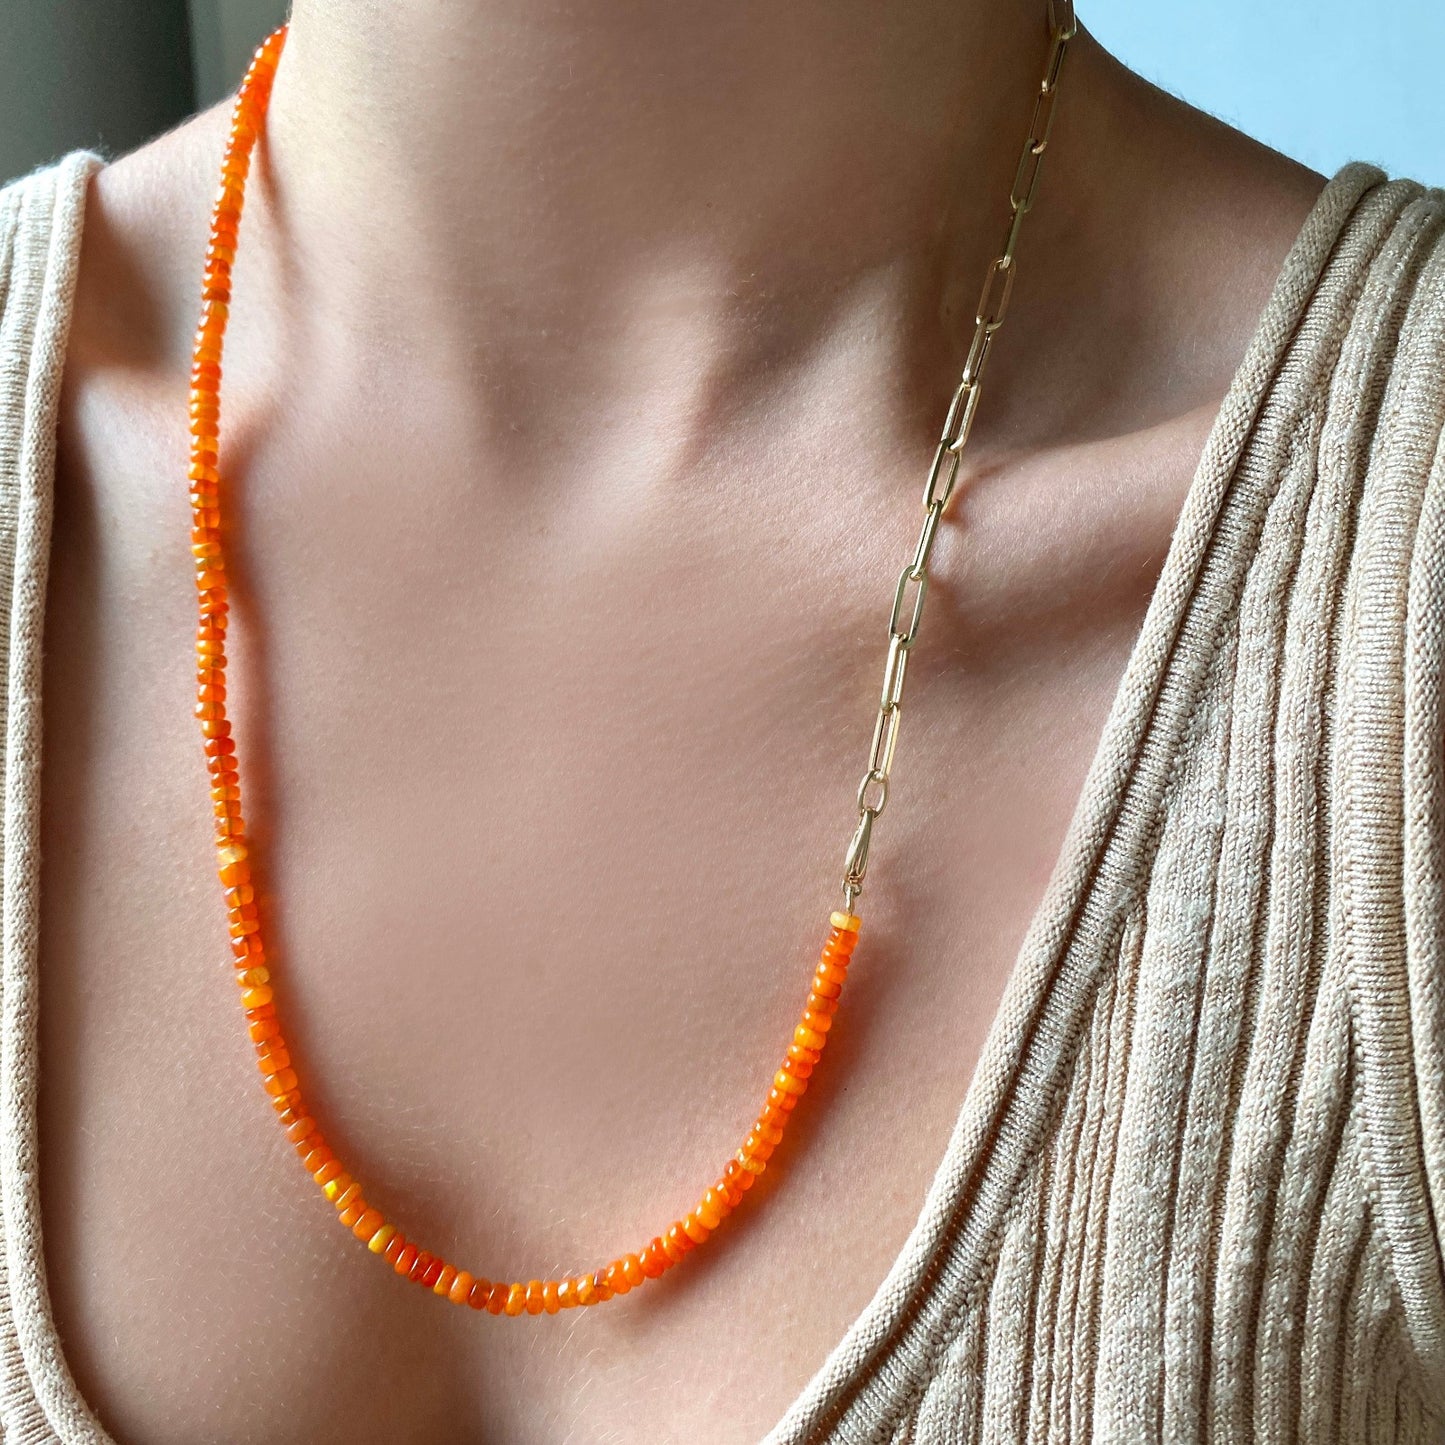 Shimmering beaded necklace made of smooth opal rondels in shades of orange on a slim gold lobster clasp. Styled on a neck layered with the paper clip chain necklace.